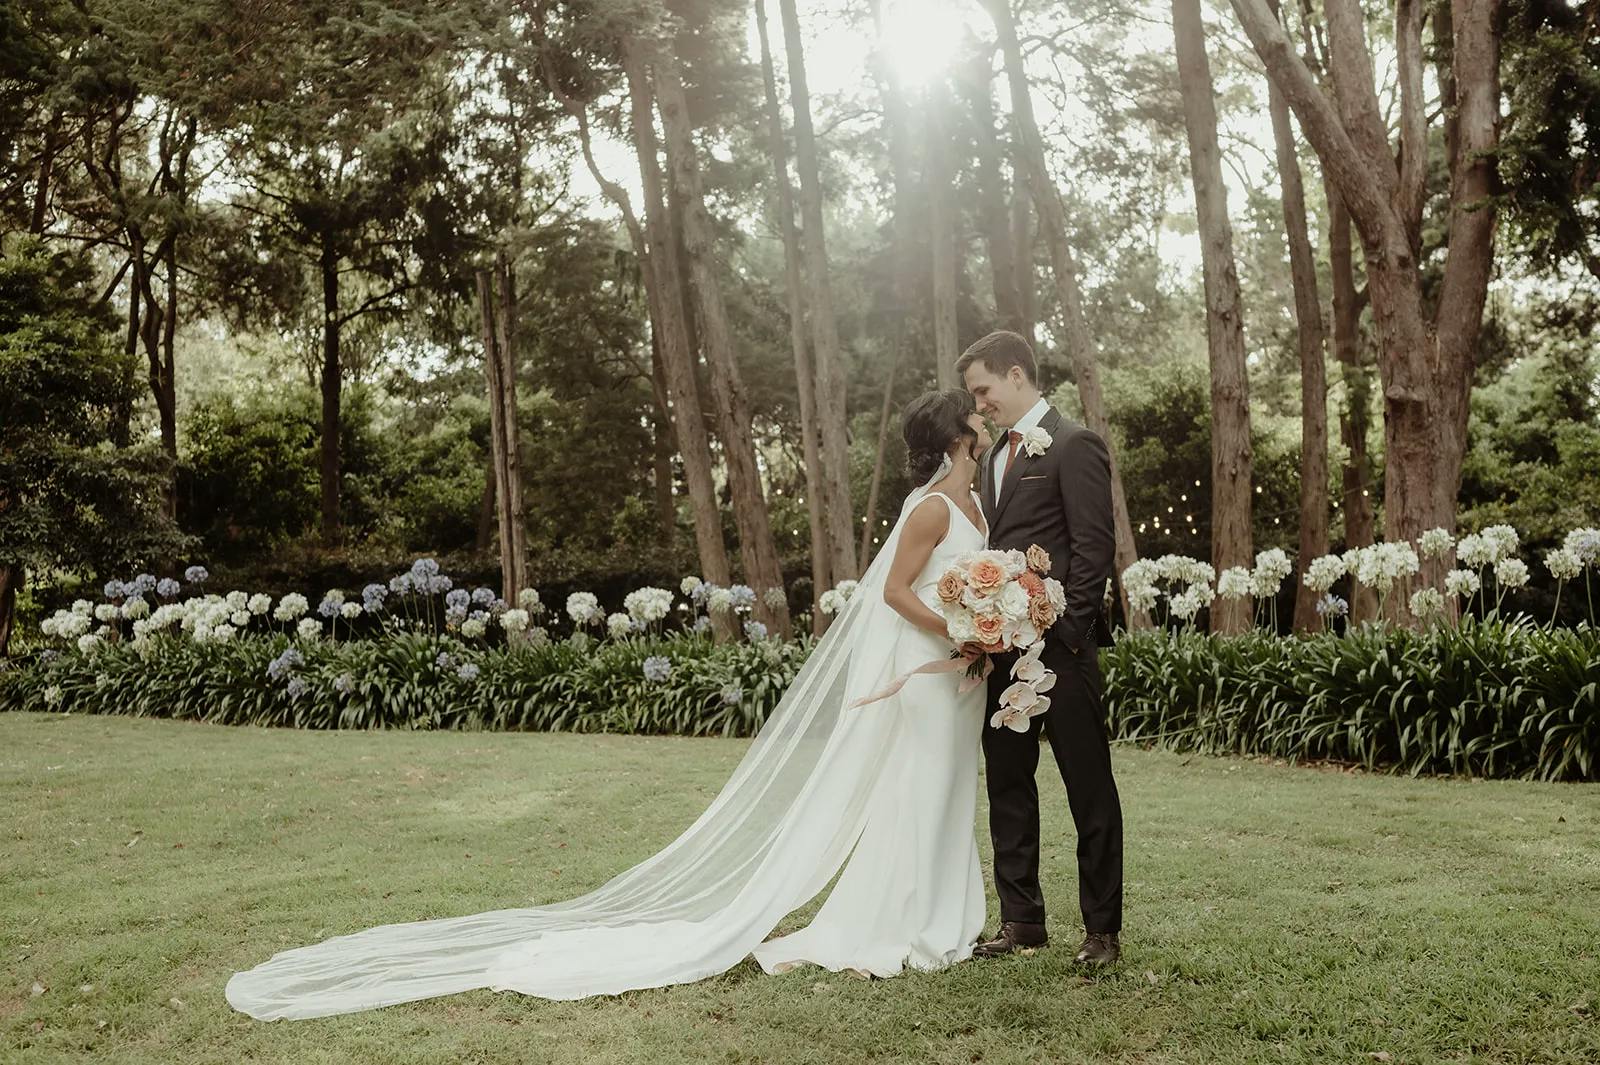 A bride and groom stand facing each other in a lush garden with tall trees and flower bushes. The bride, in a white gown with a long train, holds a bouquet of pink flowers. The groom, in a black suit, gazes at her lovingly. Sunlight filters through the trees behind them.